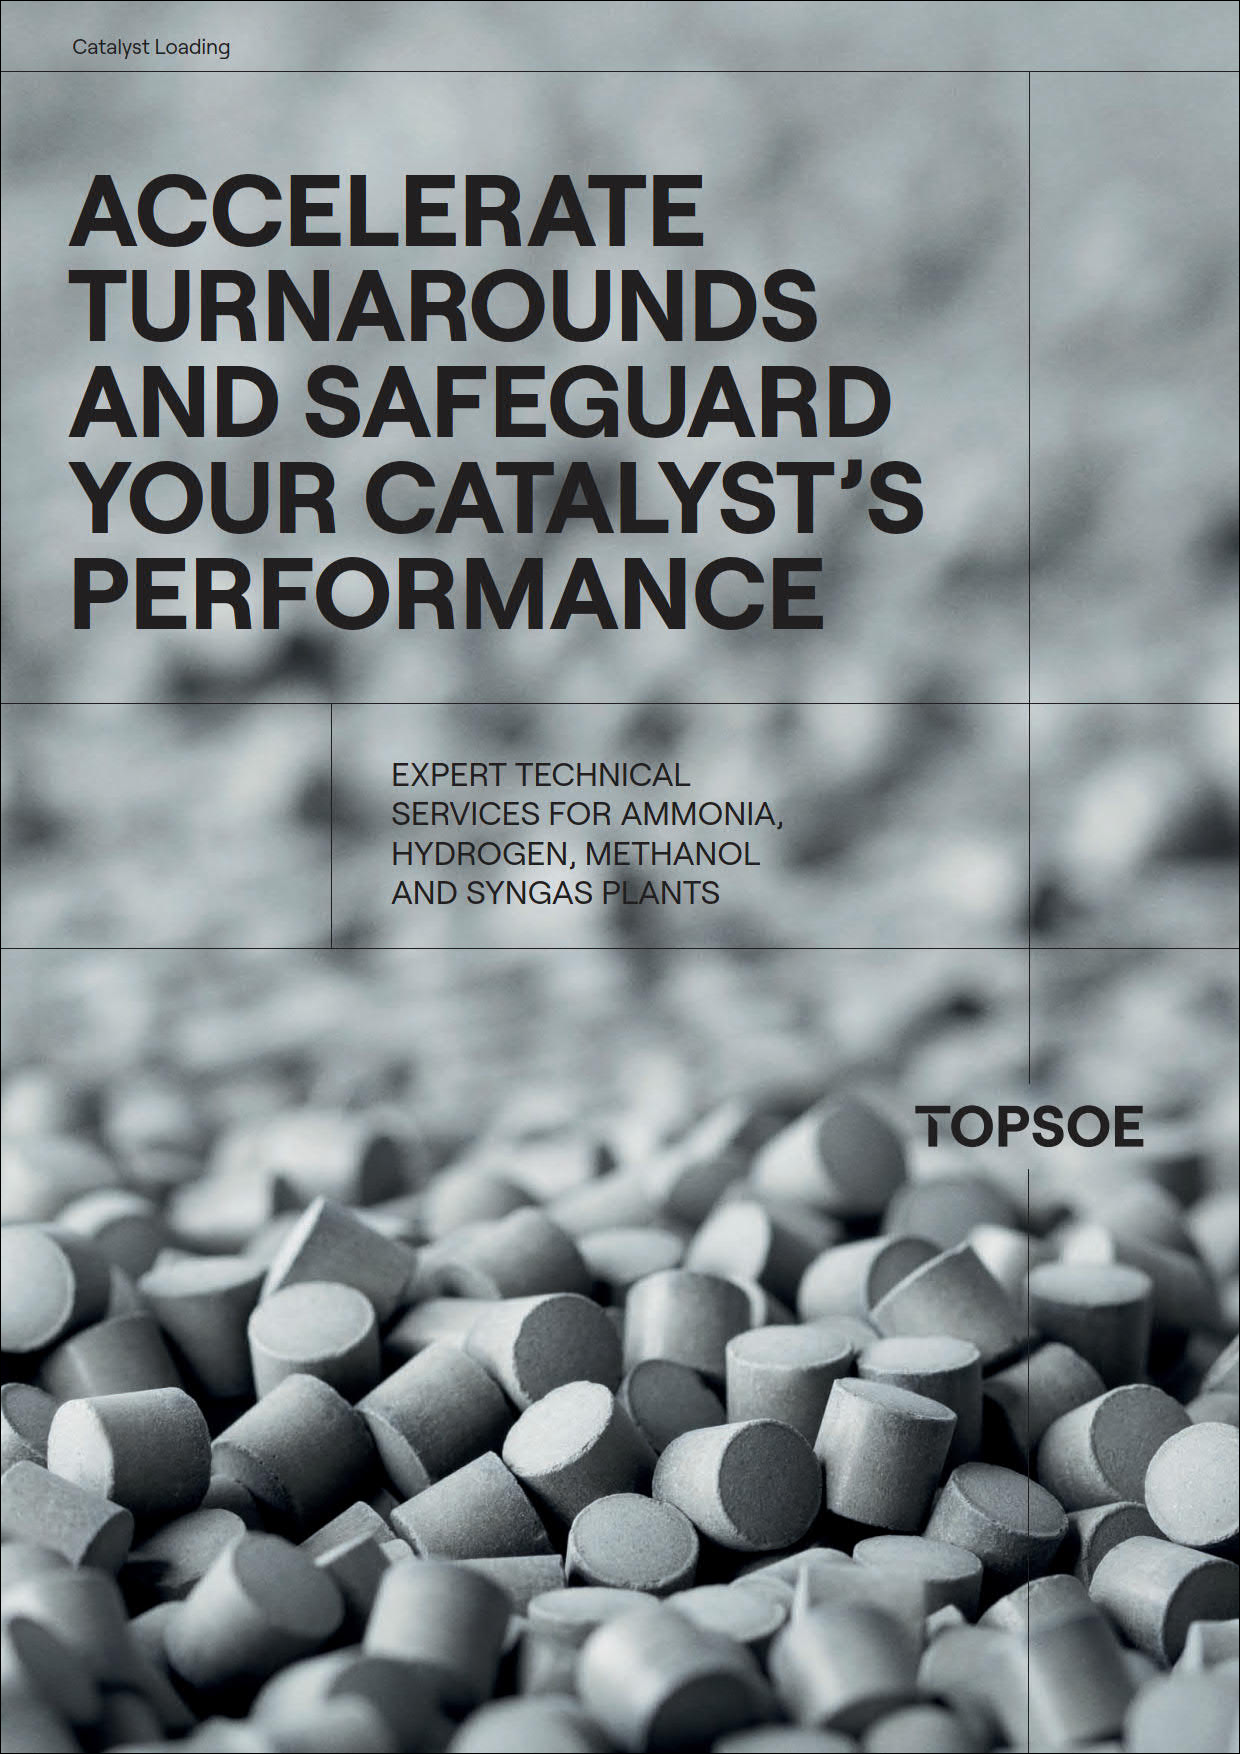 Accelerate turnarounds and safeguard your catalyst's performance